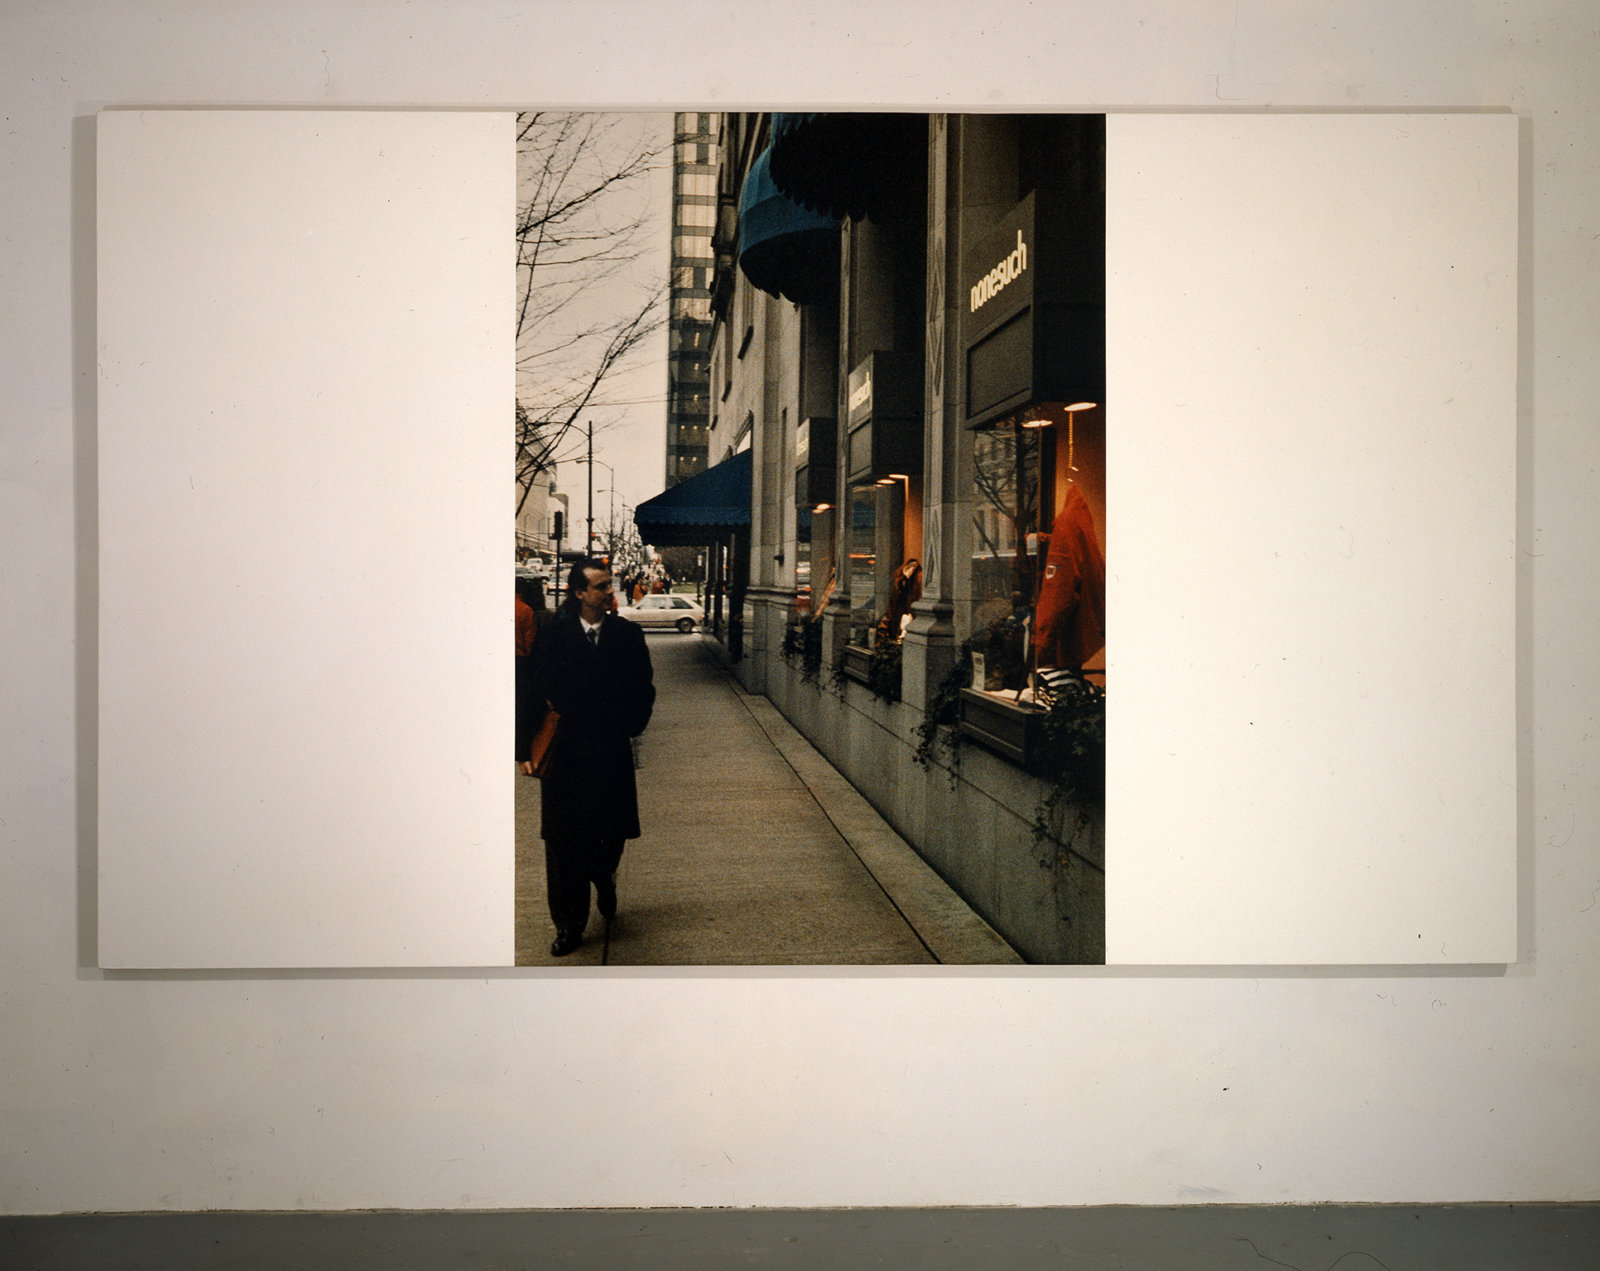 Ian Wallace, My Heroes in the Street VI (Doug), 1987, photolaminate and acrylic on linen, 72 x 120 in. (183 x 305 cm)